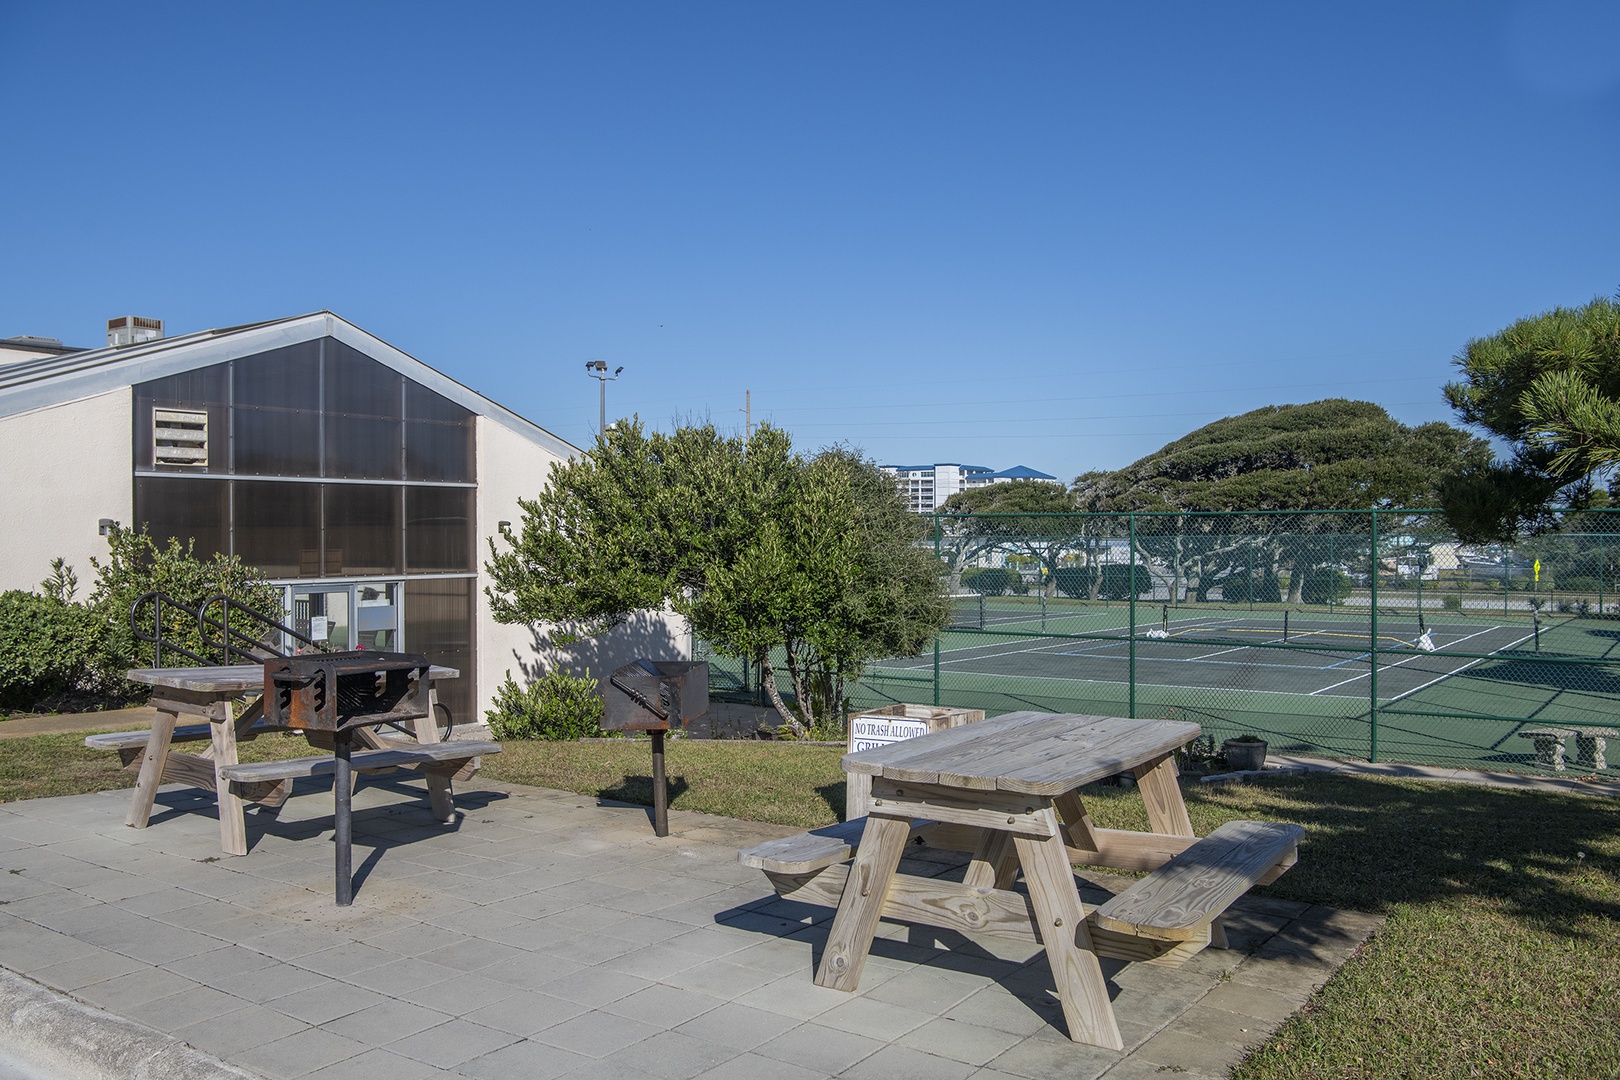 Grill, Picnic Area and Tennis Courts